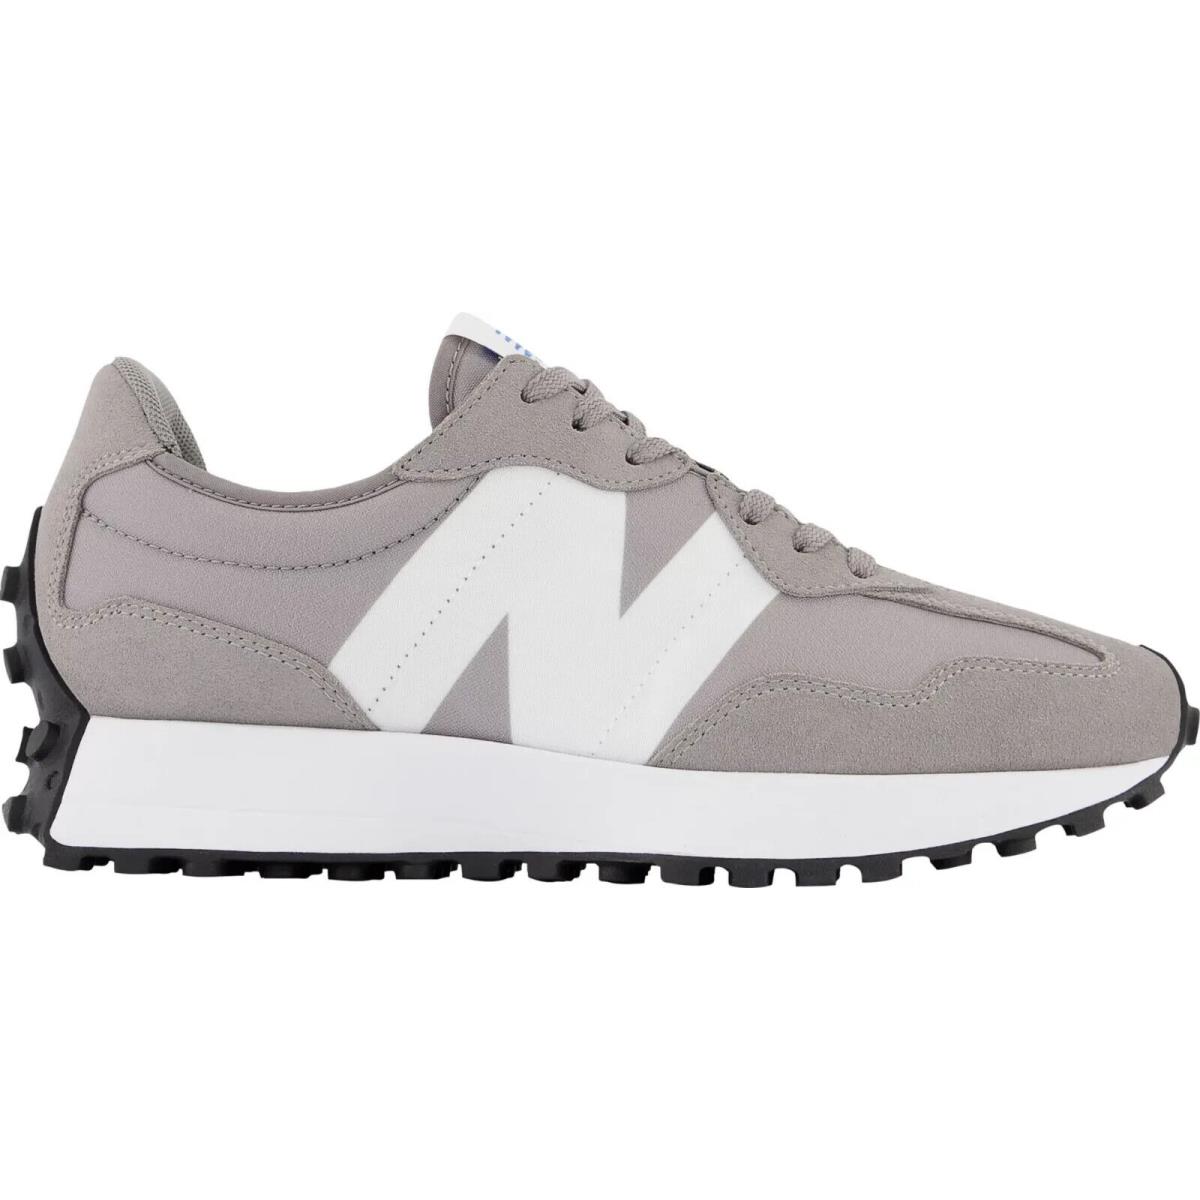 New Balance 327 Women`s Casual Shoes Marblehead White US Sizes 6-11